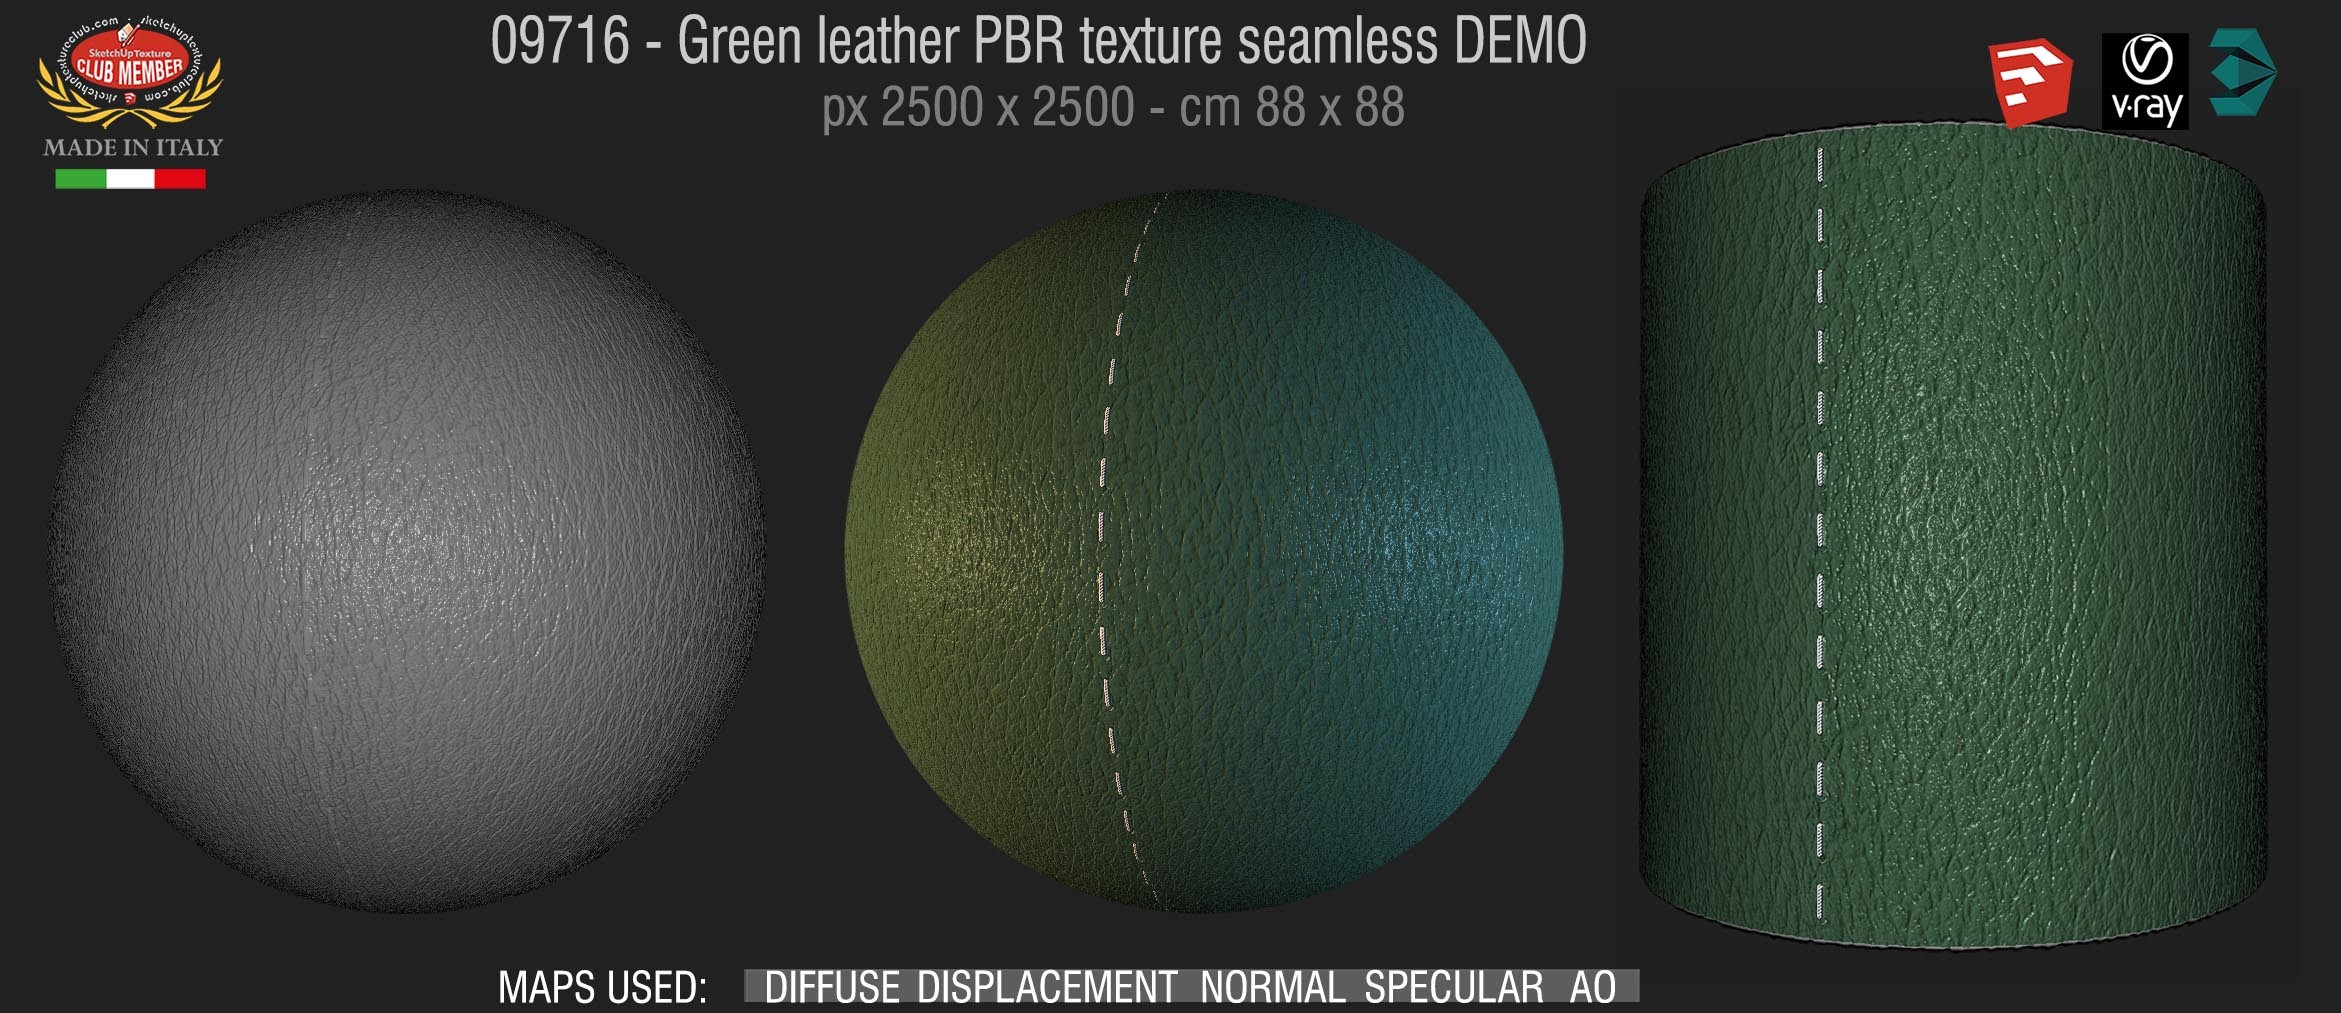 09716 Green leather PBR texture seamless DEMO